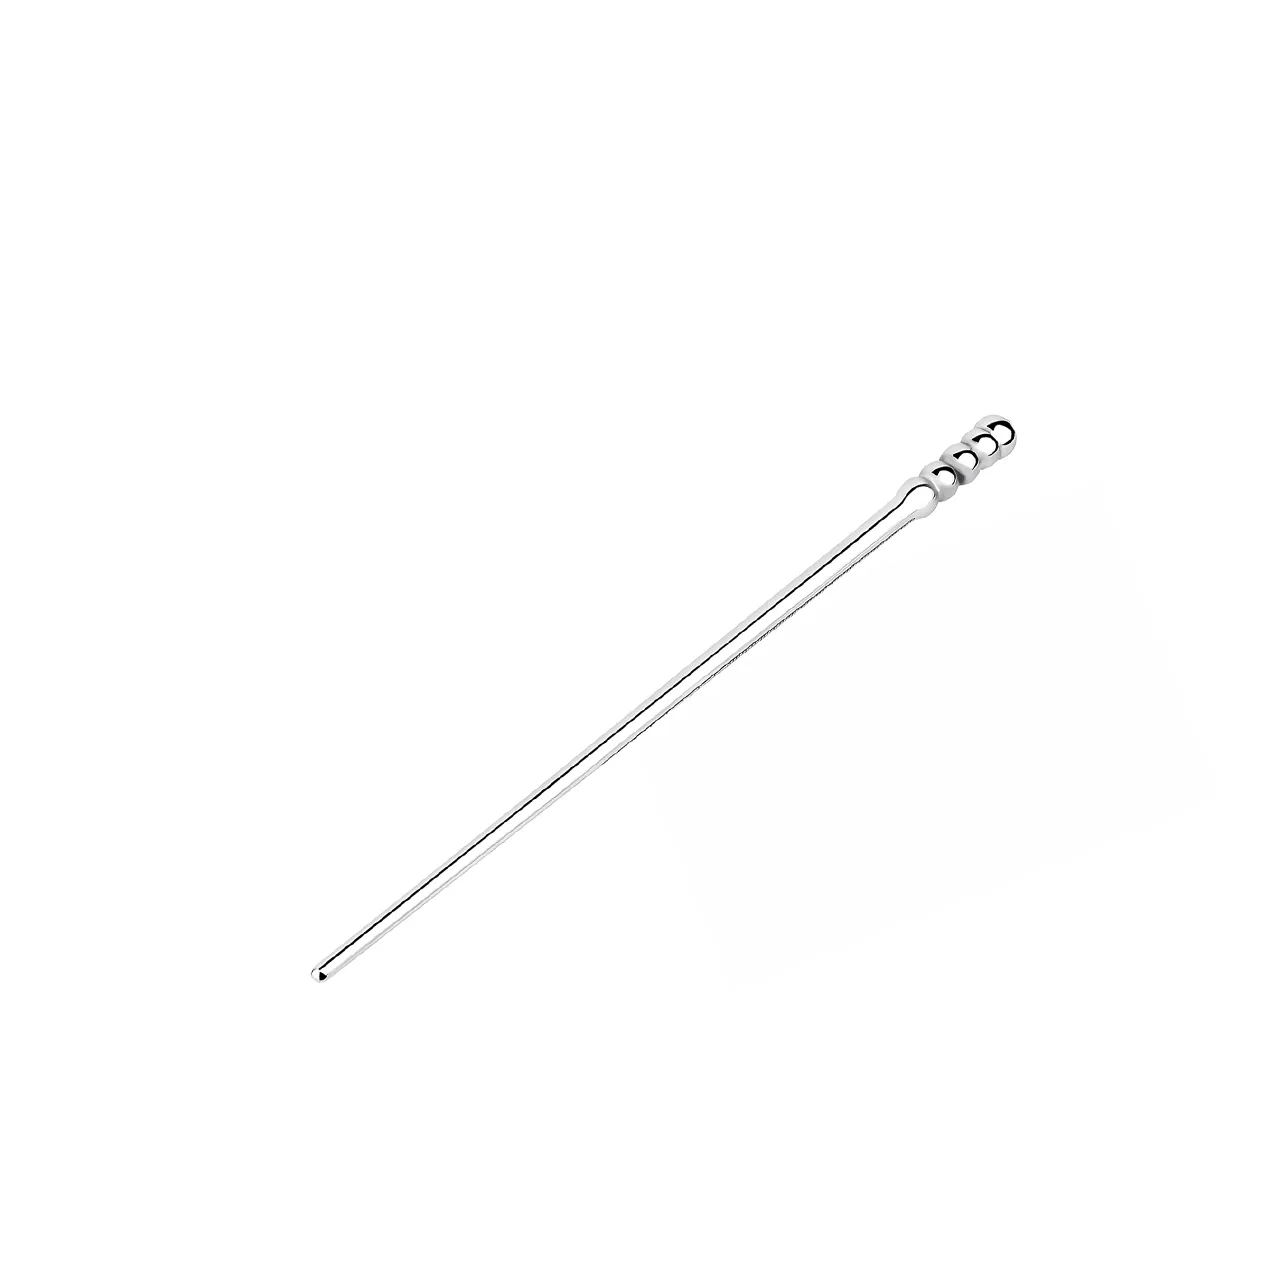 Dip-Stick-Wand-Trainer-4-to-6-mm-OPR-278021-3